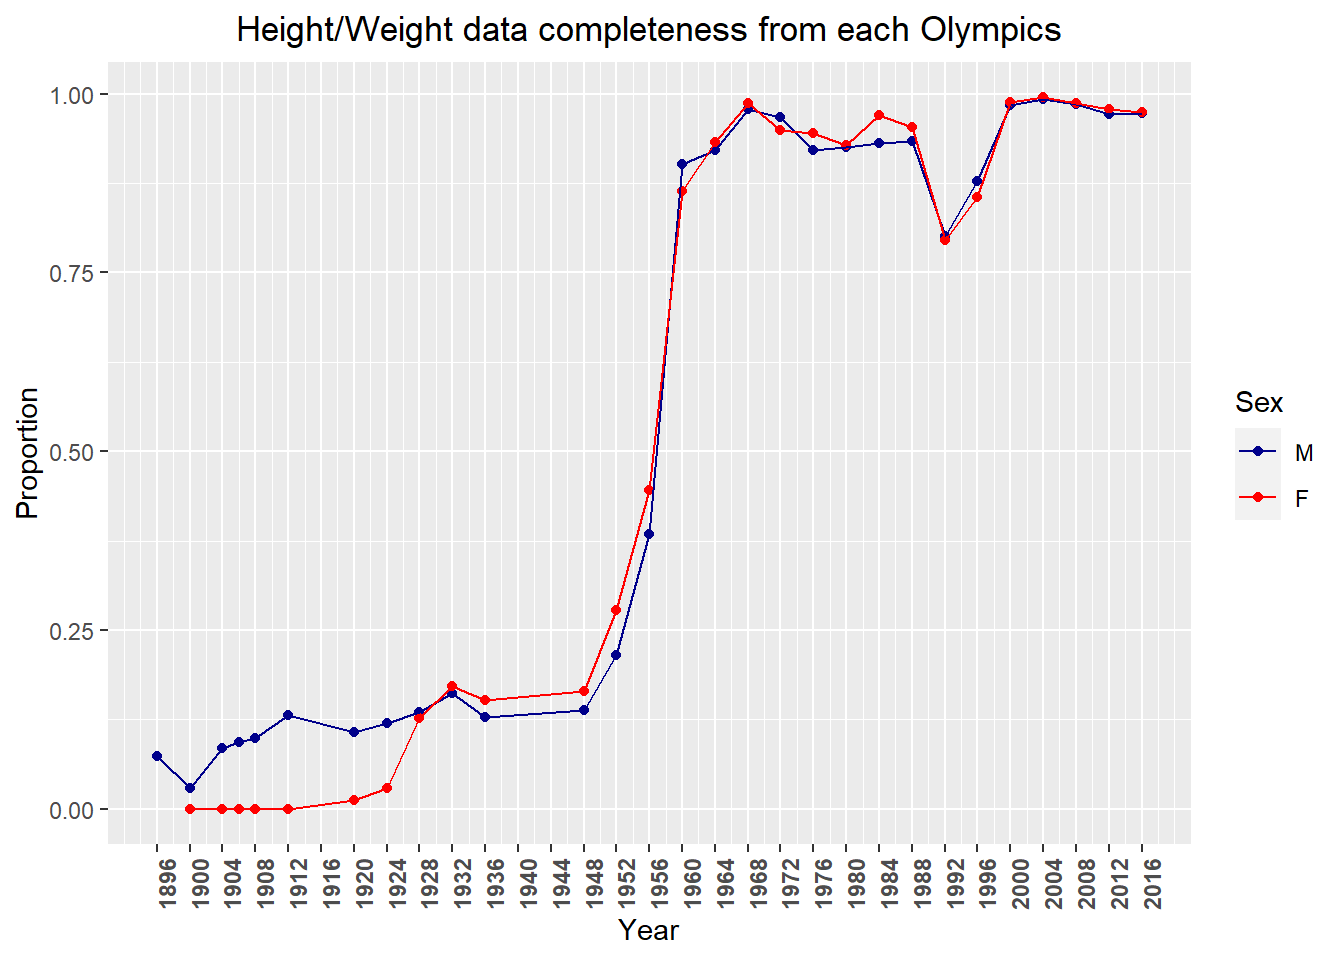 Height/Weight data completeness from each Olympics